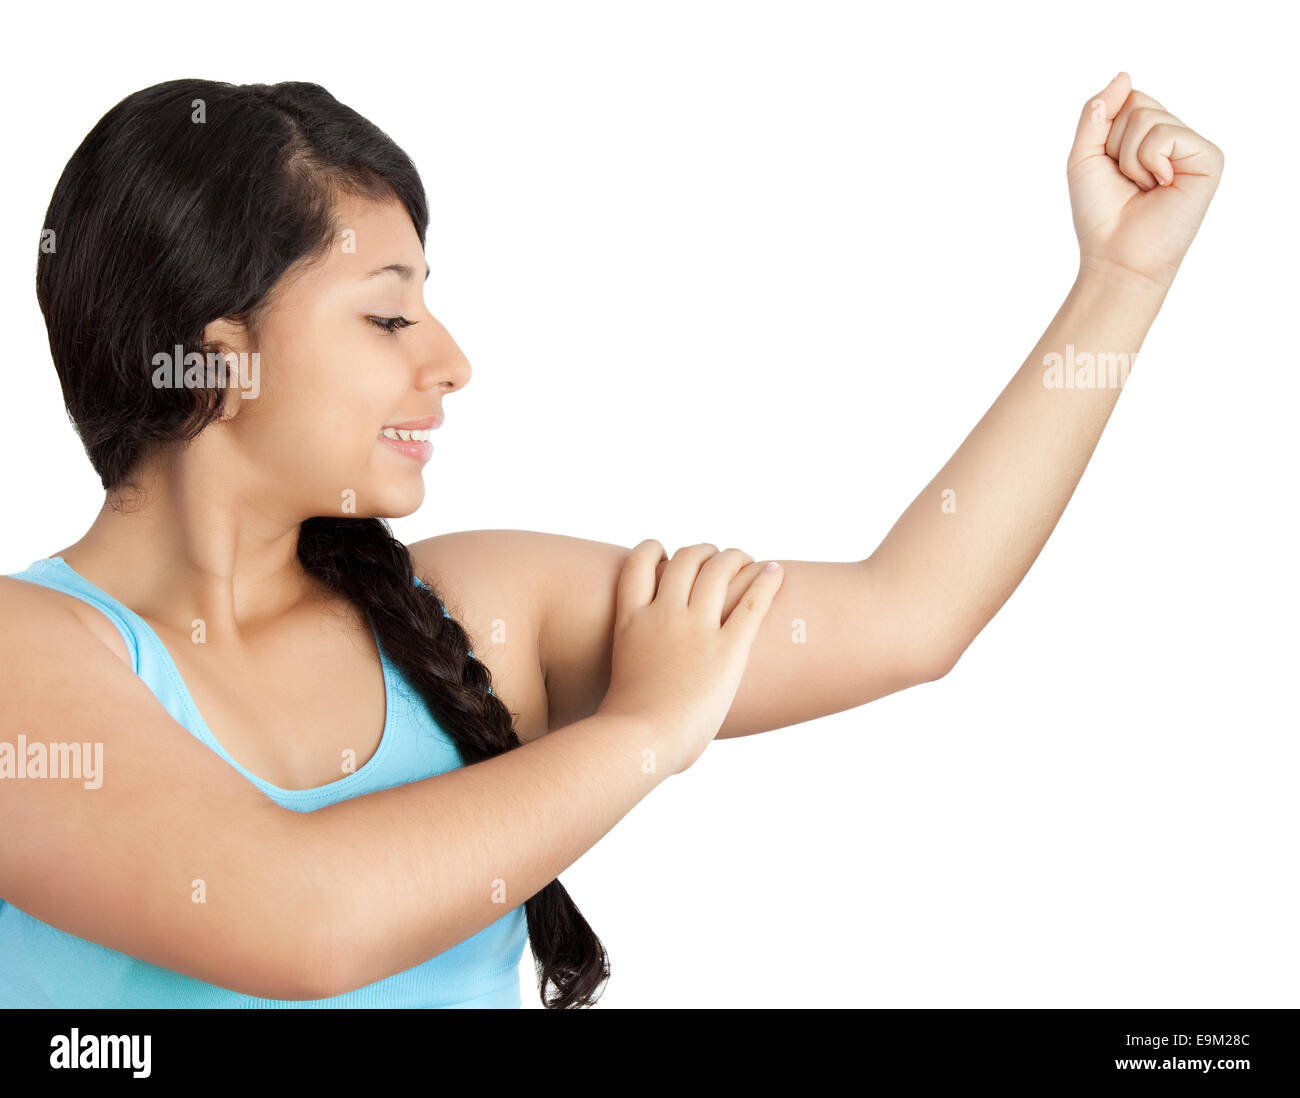 young sporty woman showing her biceps Stock Photo